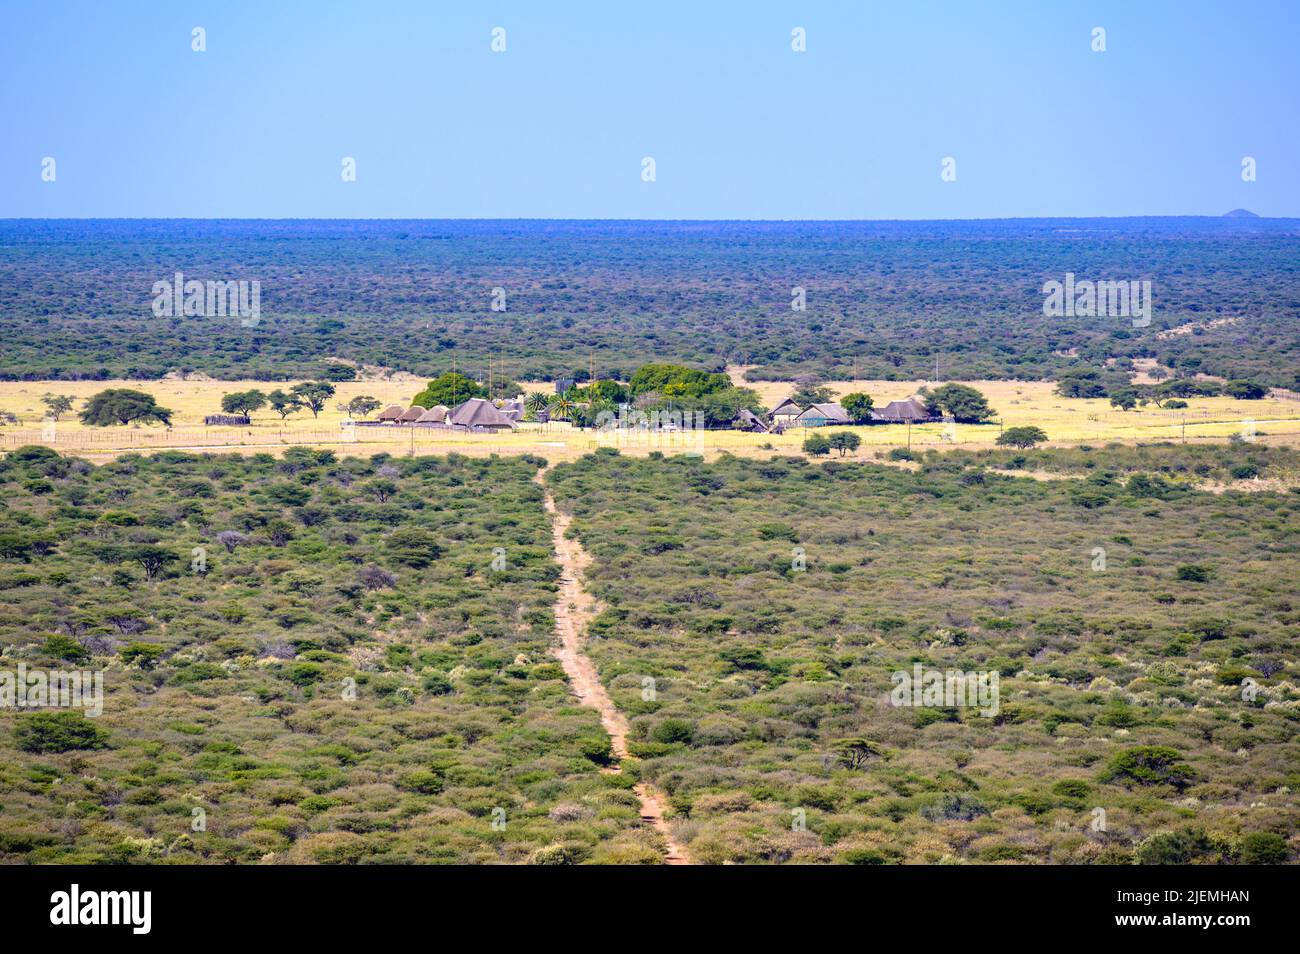 A guest farm in Namibia Africa Stock Photo